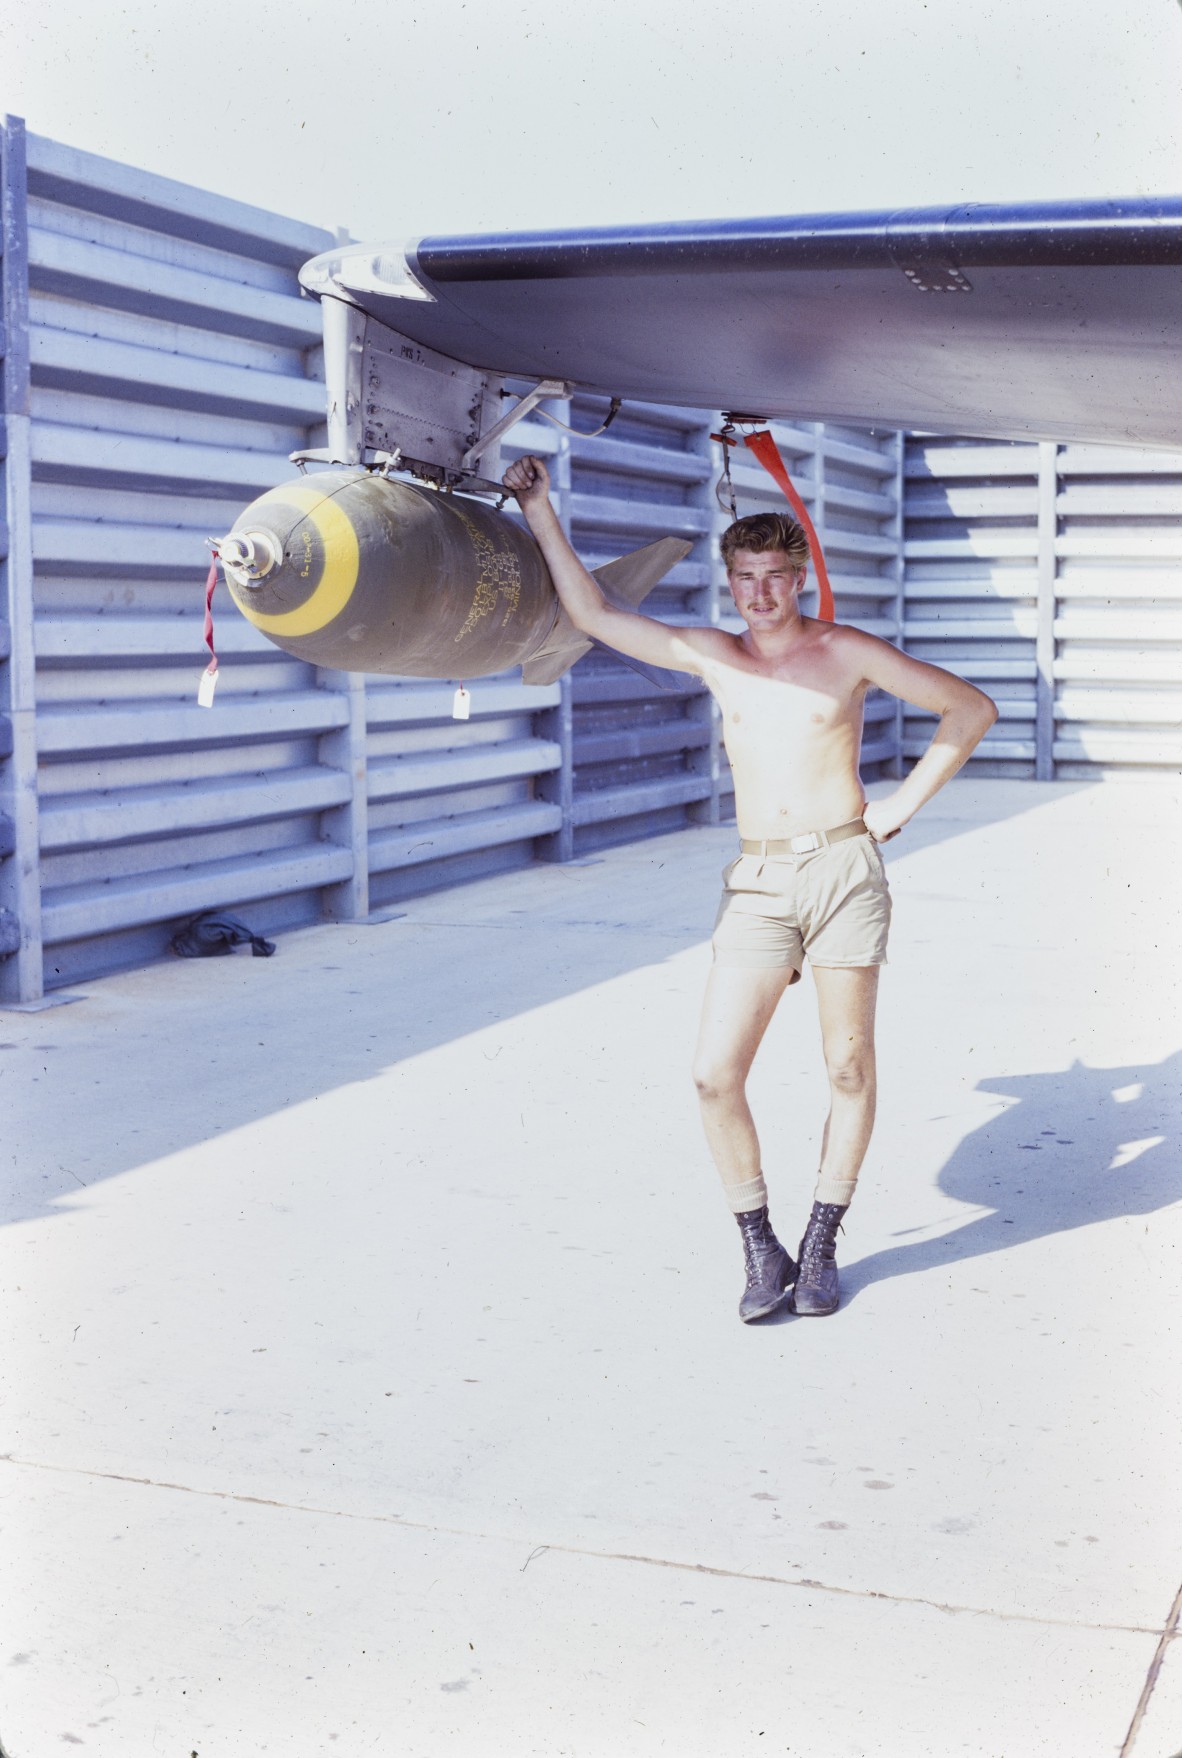 Jon Fallows leans against a mounted bomb on the wing of a Canberra Bomber 